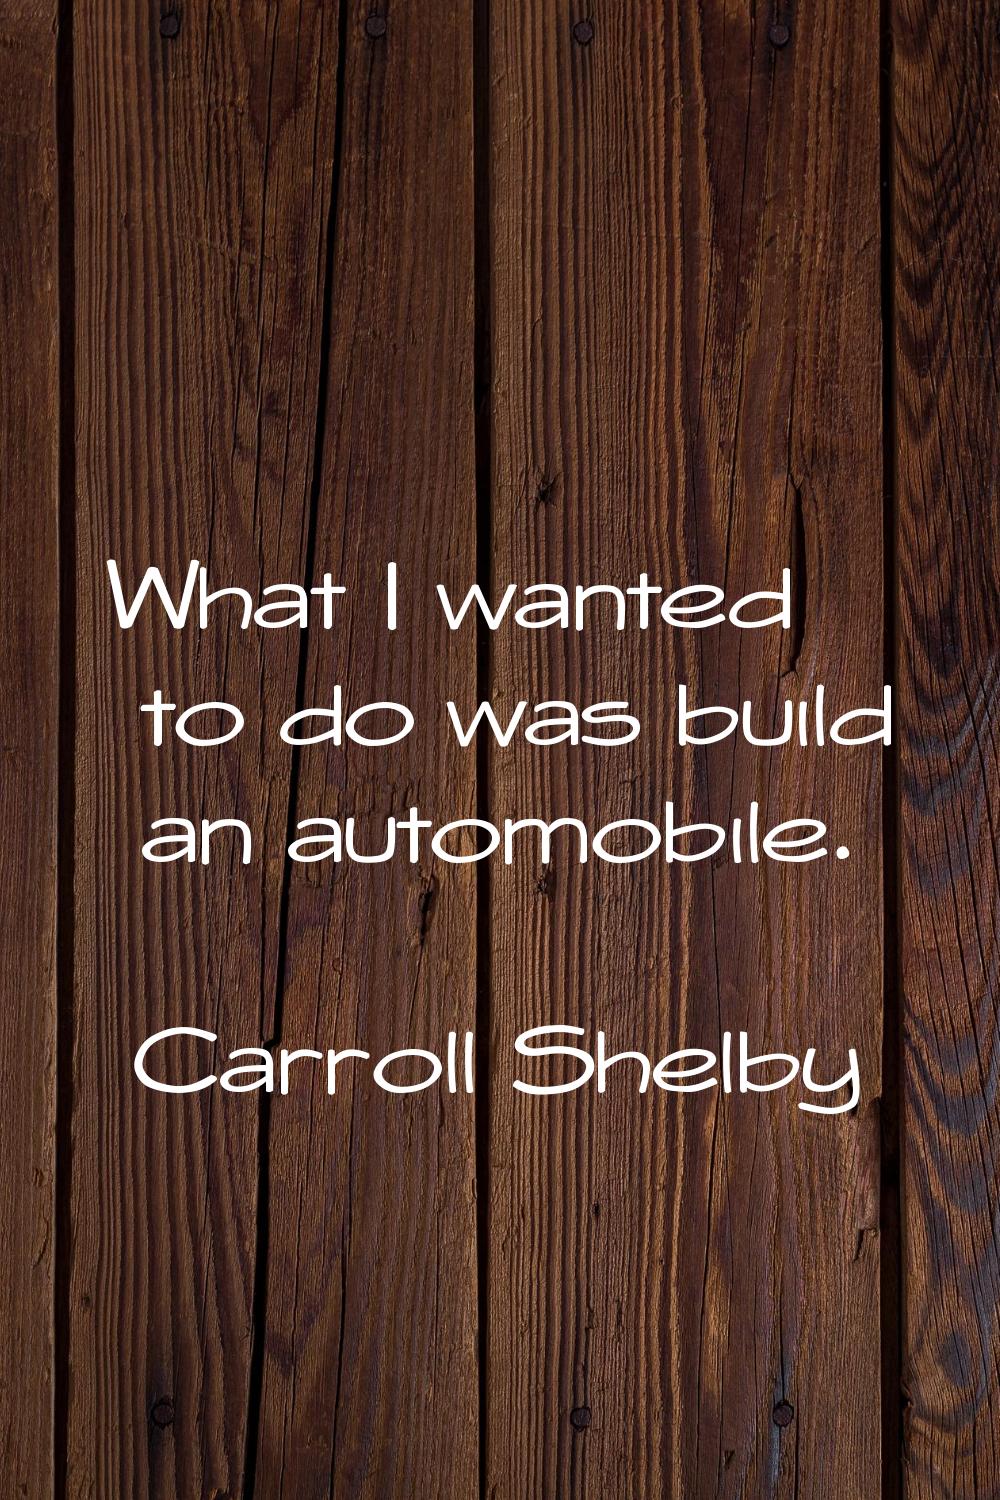 What I wanted to do was build an automobile.